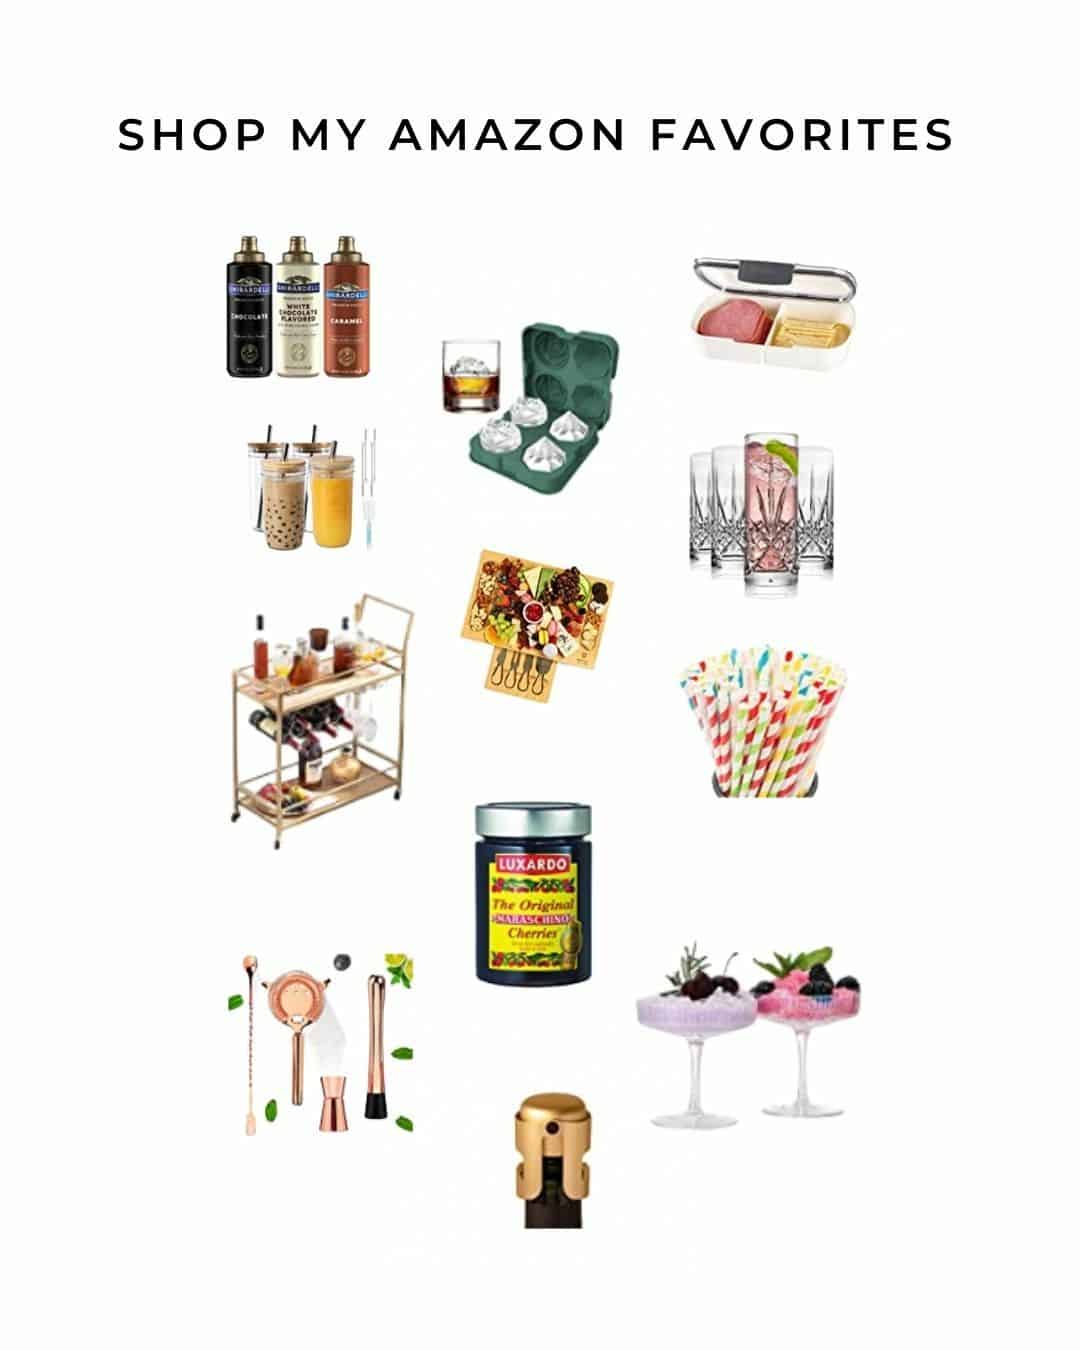 Items pictured include syrup, cocktail glasses, bar tool set, luxardo cherries, rose and diamond ice molds, and a bar cart with the words "Shop my amazon favorites" in black text at the top. 